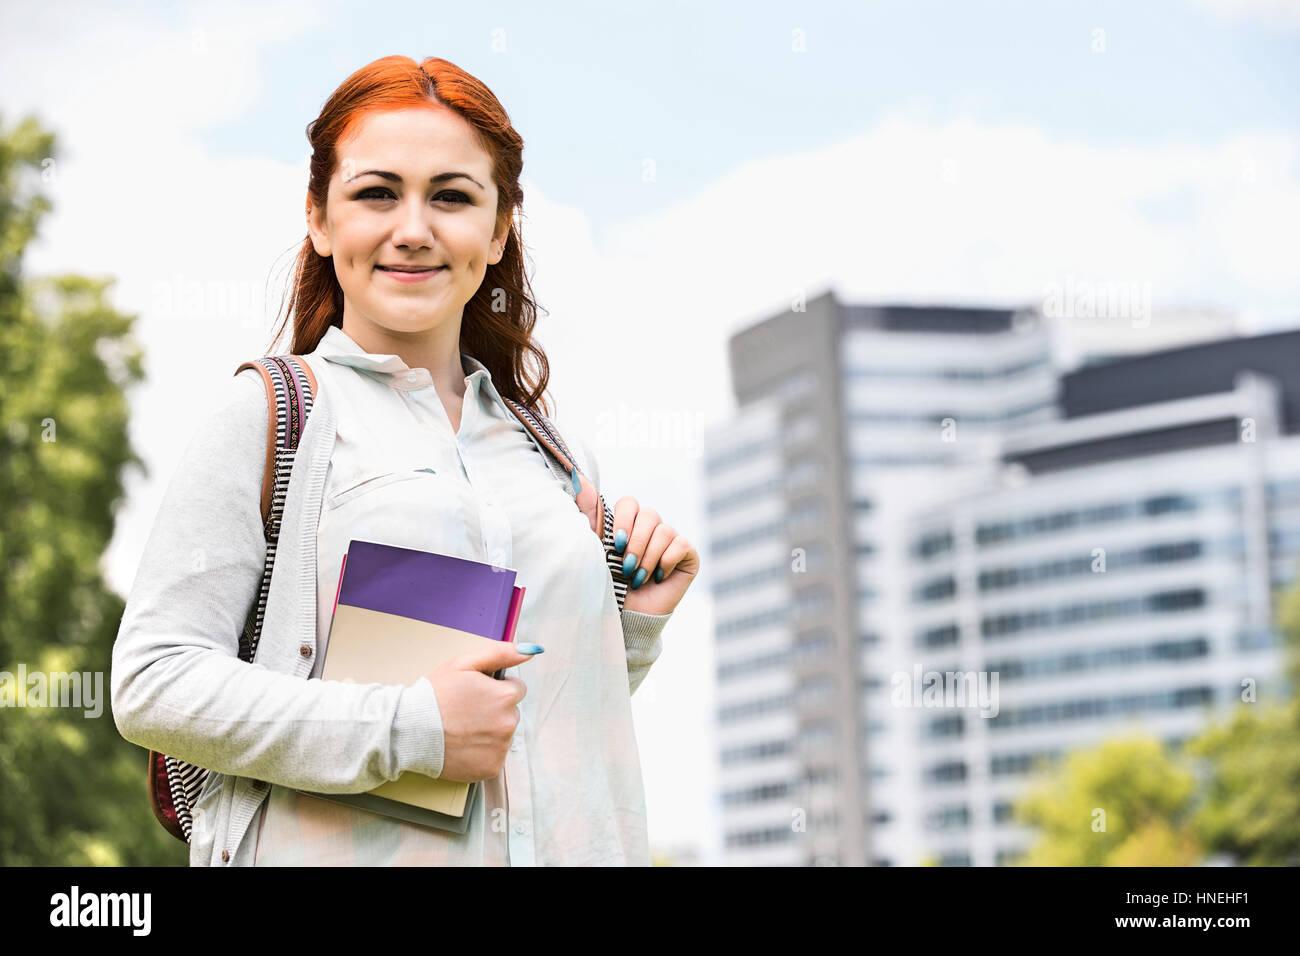 Portrait of beautiful college student at campus Stock Photo